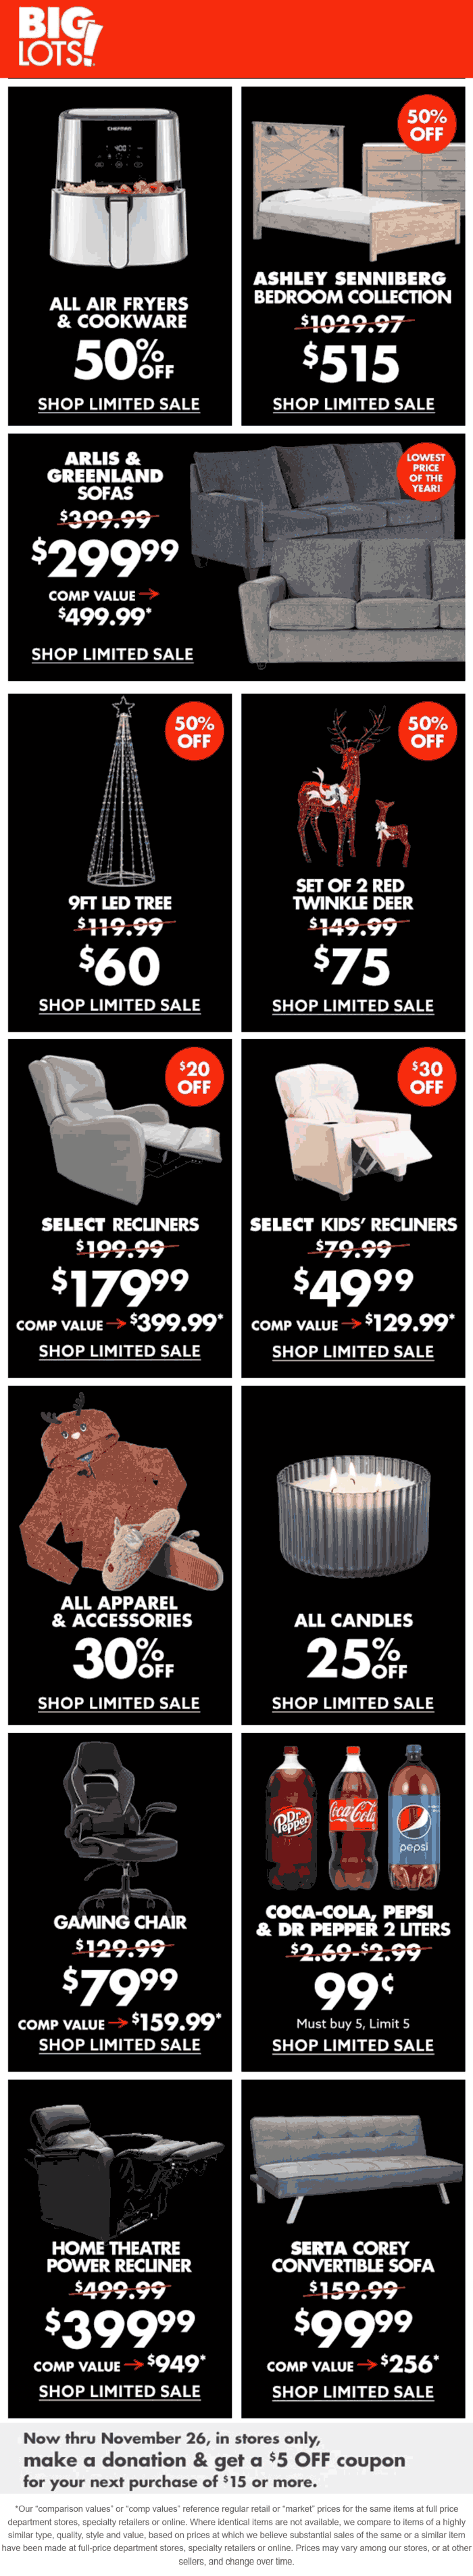 Big Lots stores Coupon  $300 couches, 50% off bedroom collection & more at Big Lots #biglots 